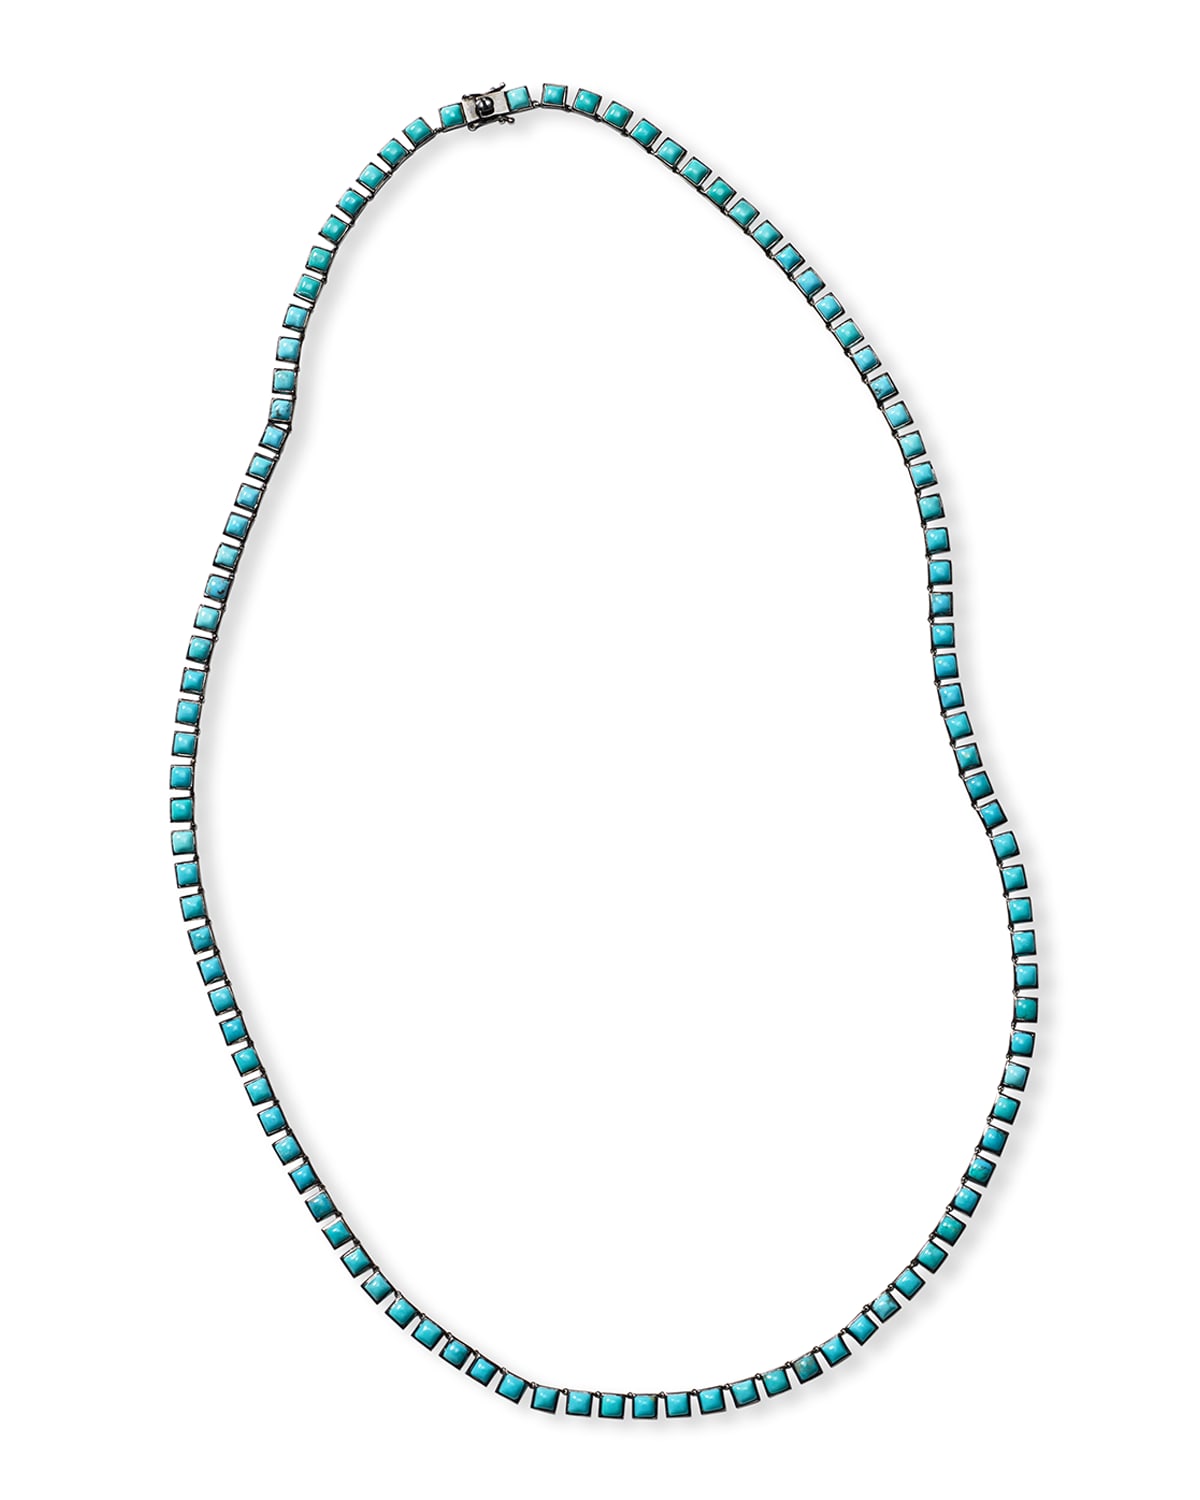 Small Tile Opera Necklace in Turquoise